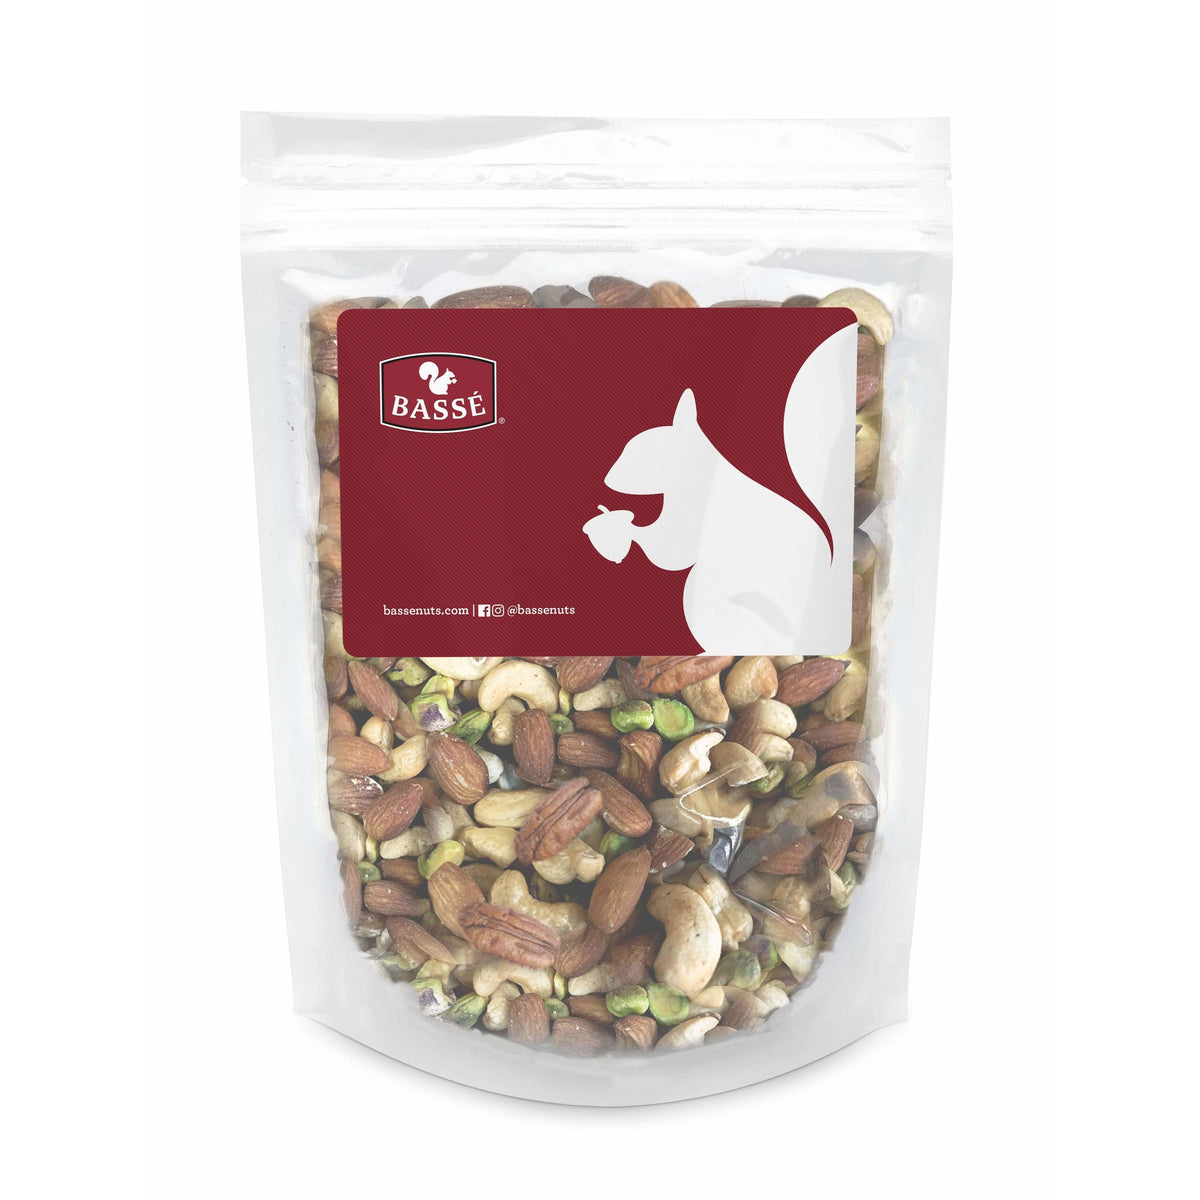 Raw Energy Nut Mix, Unsalted